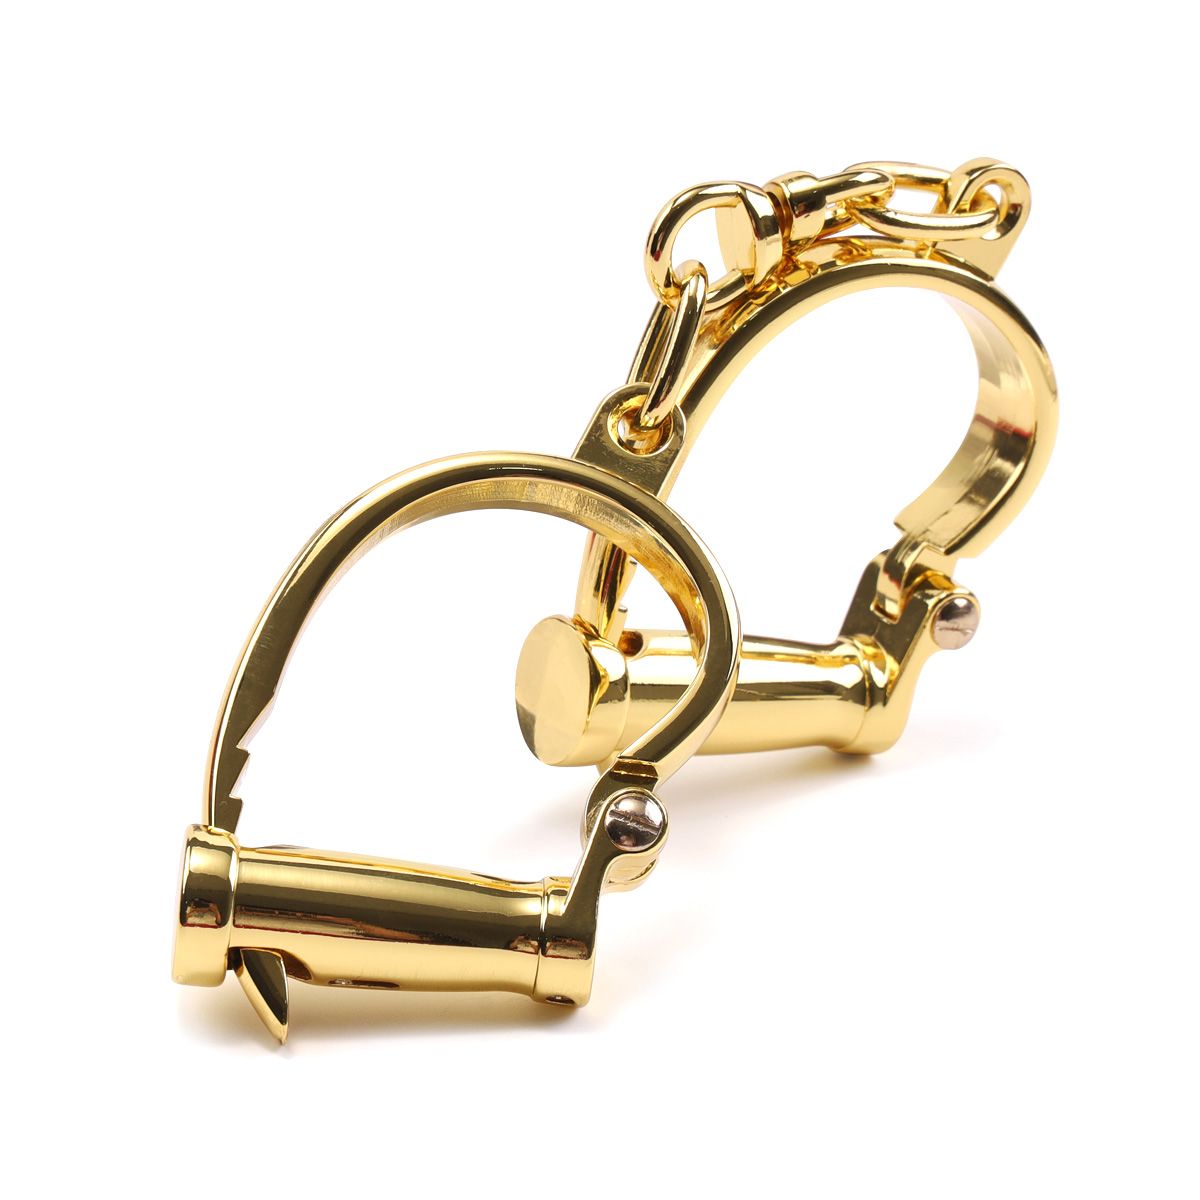 Deluxe gold plated handcuffs 